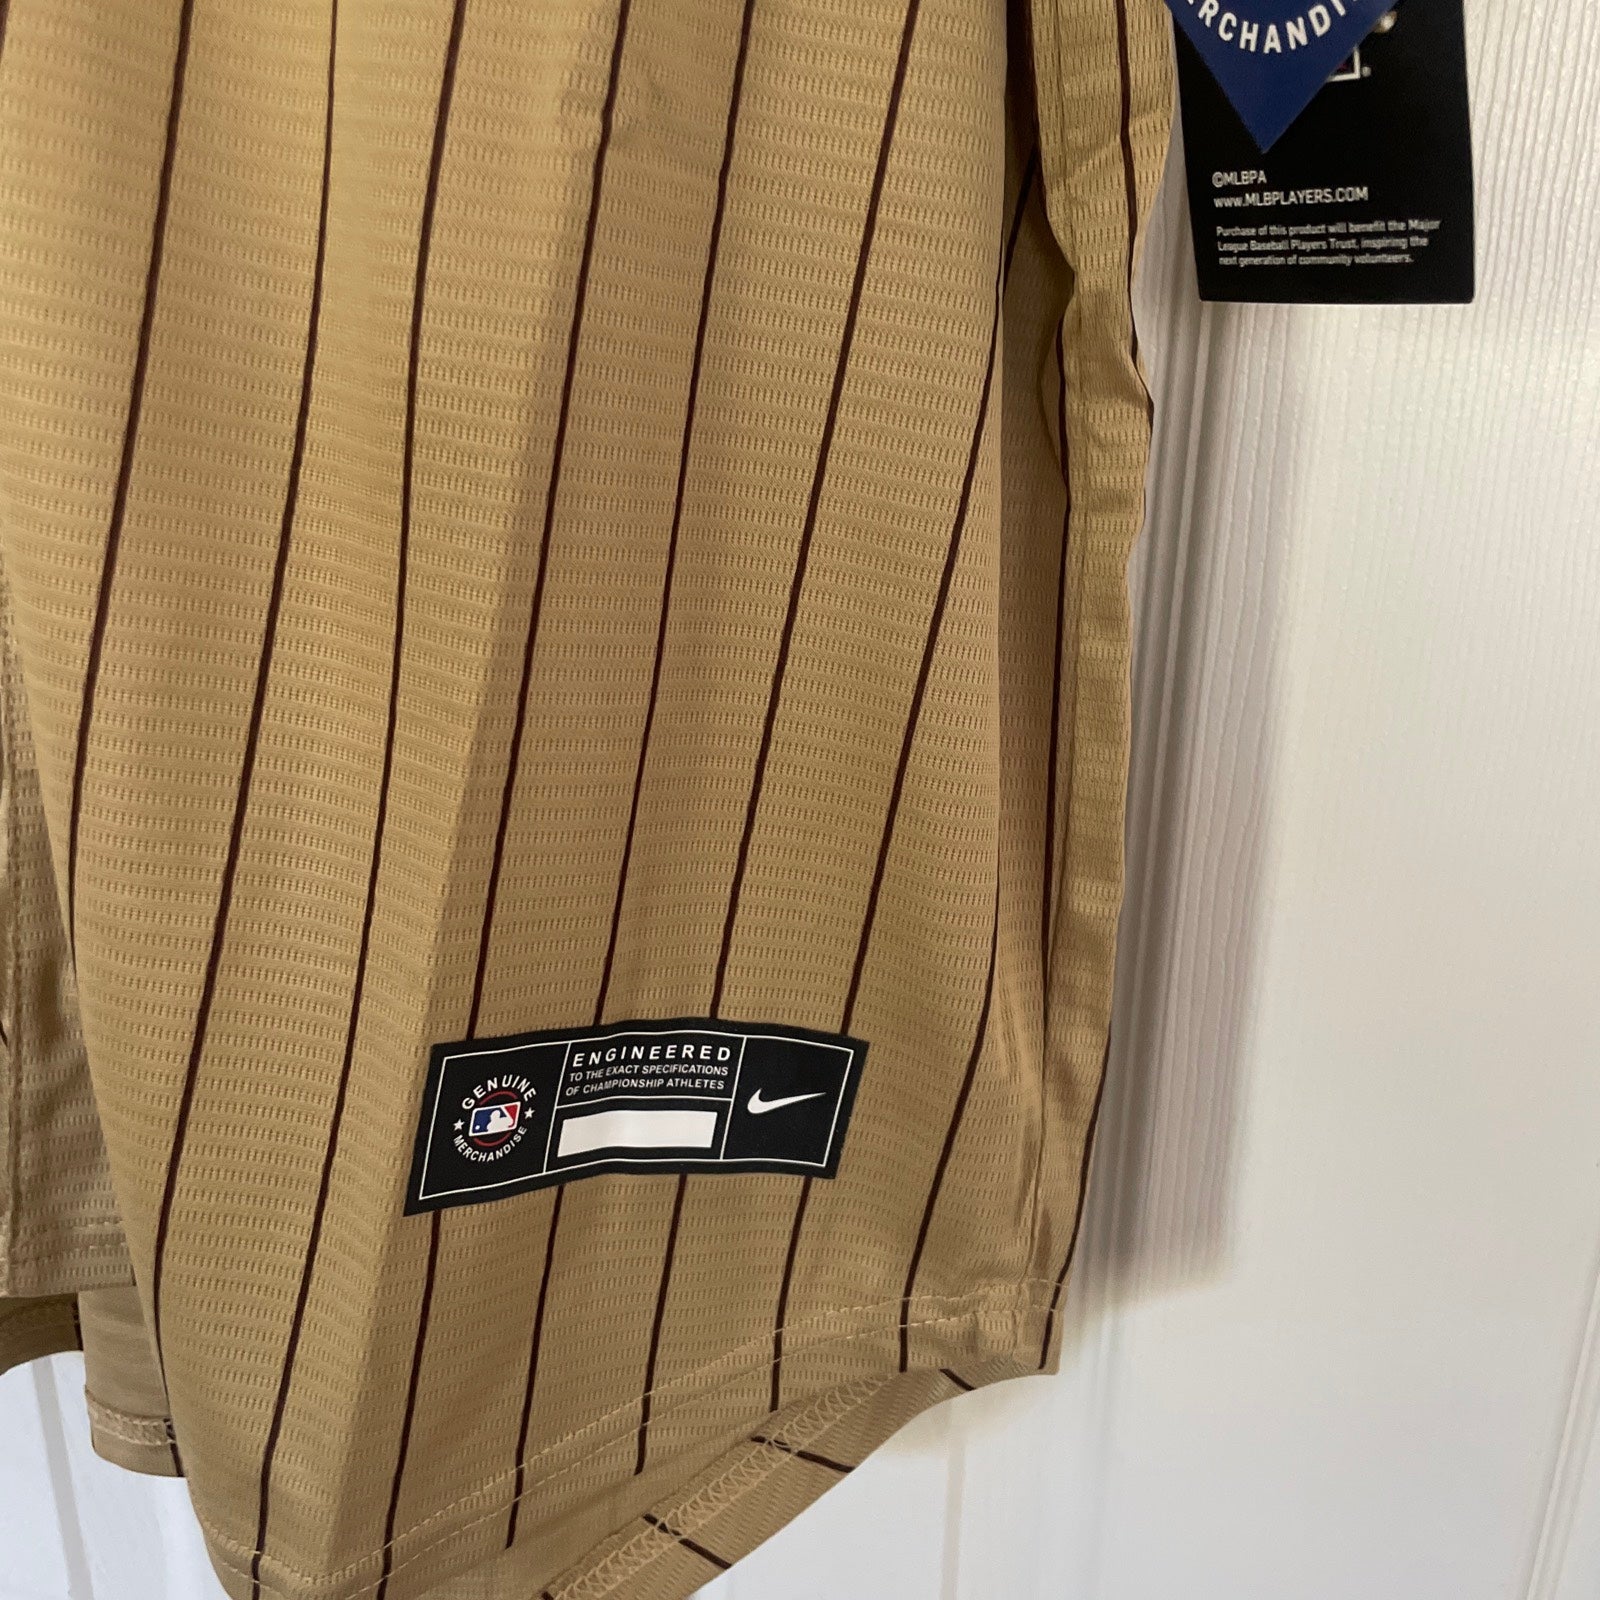 Brand New San Diego Padres Juan Soto Jersey With Tags - Men's Size